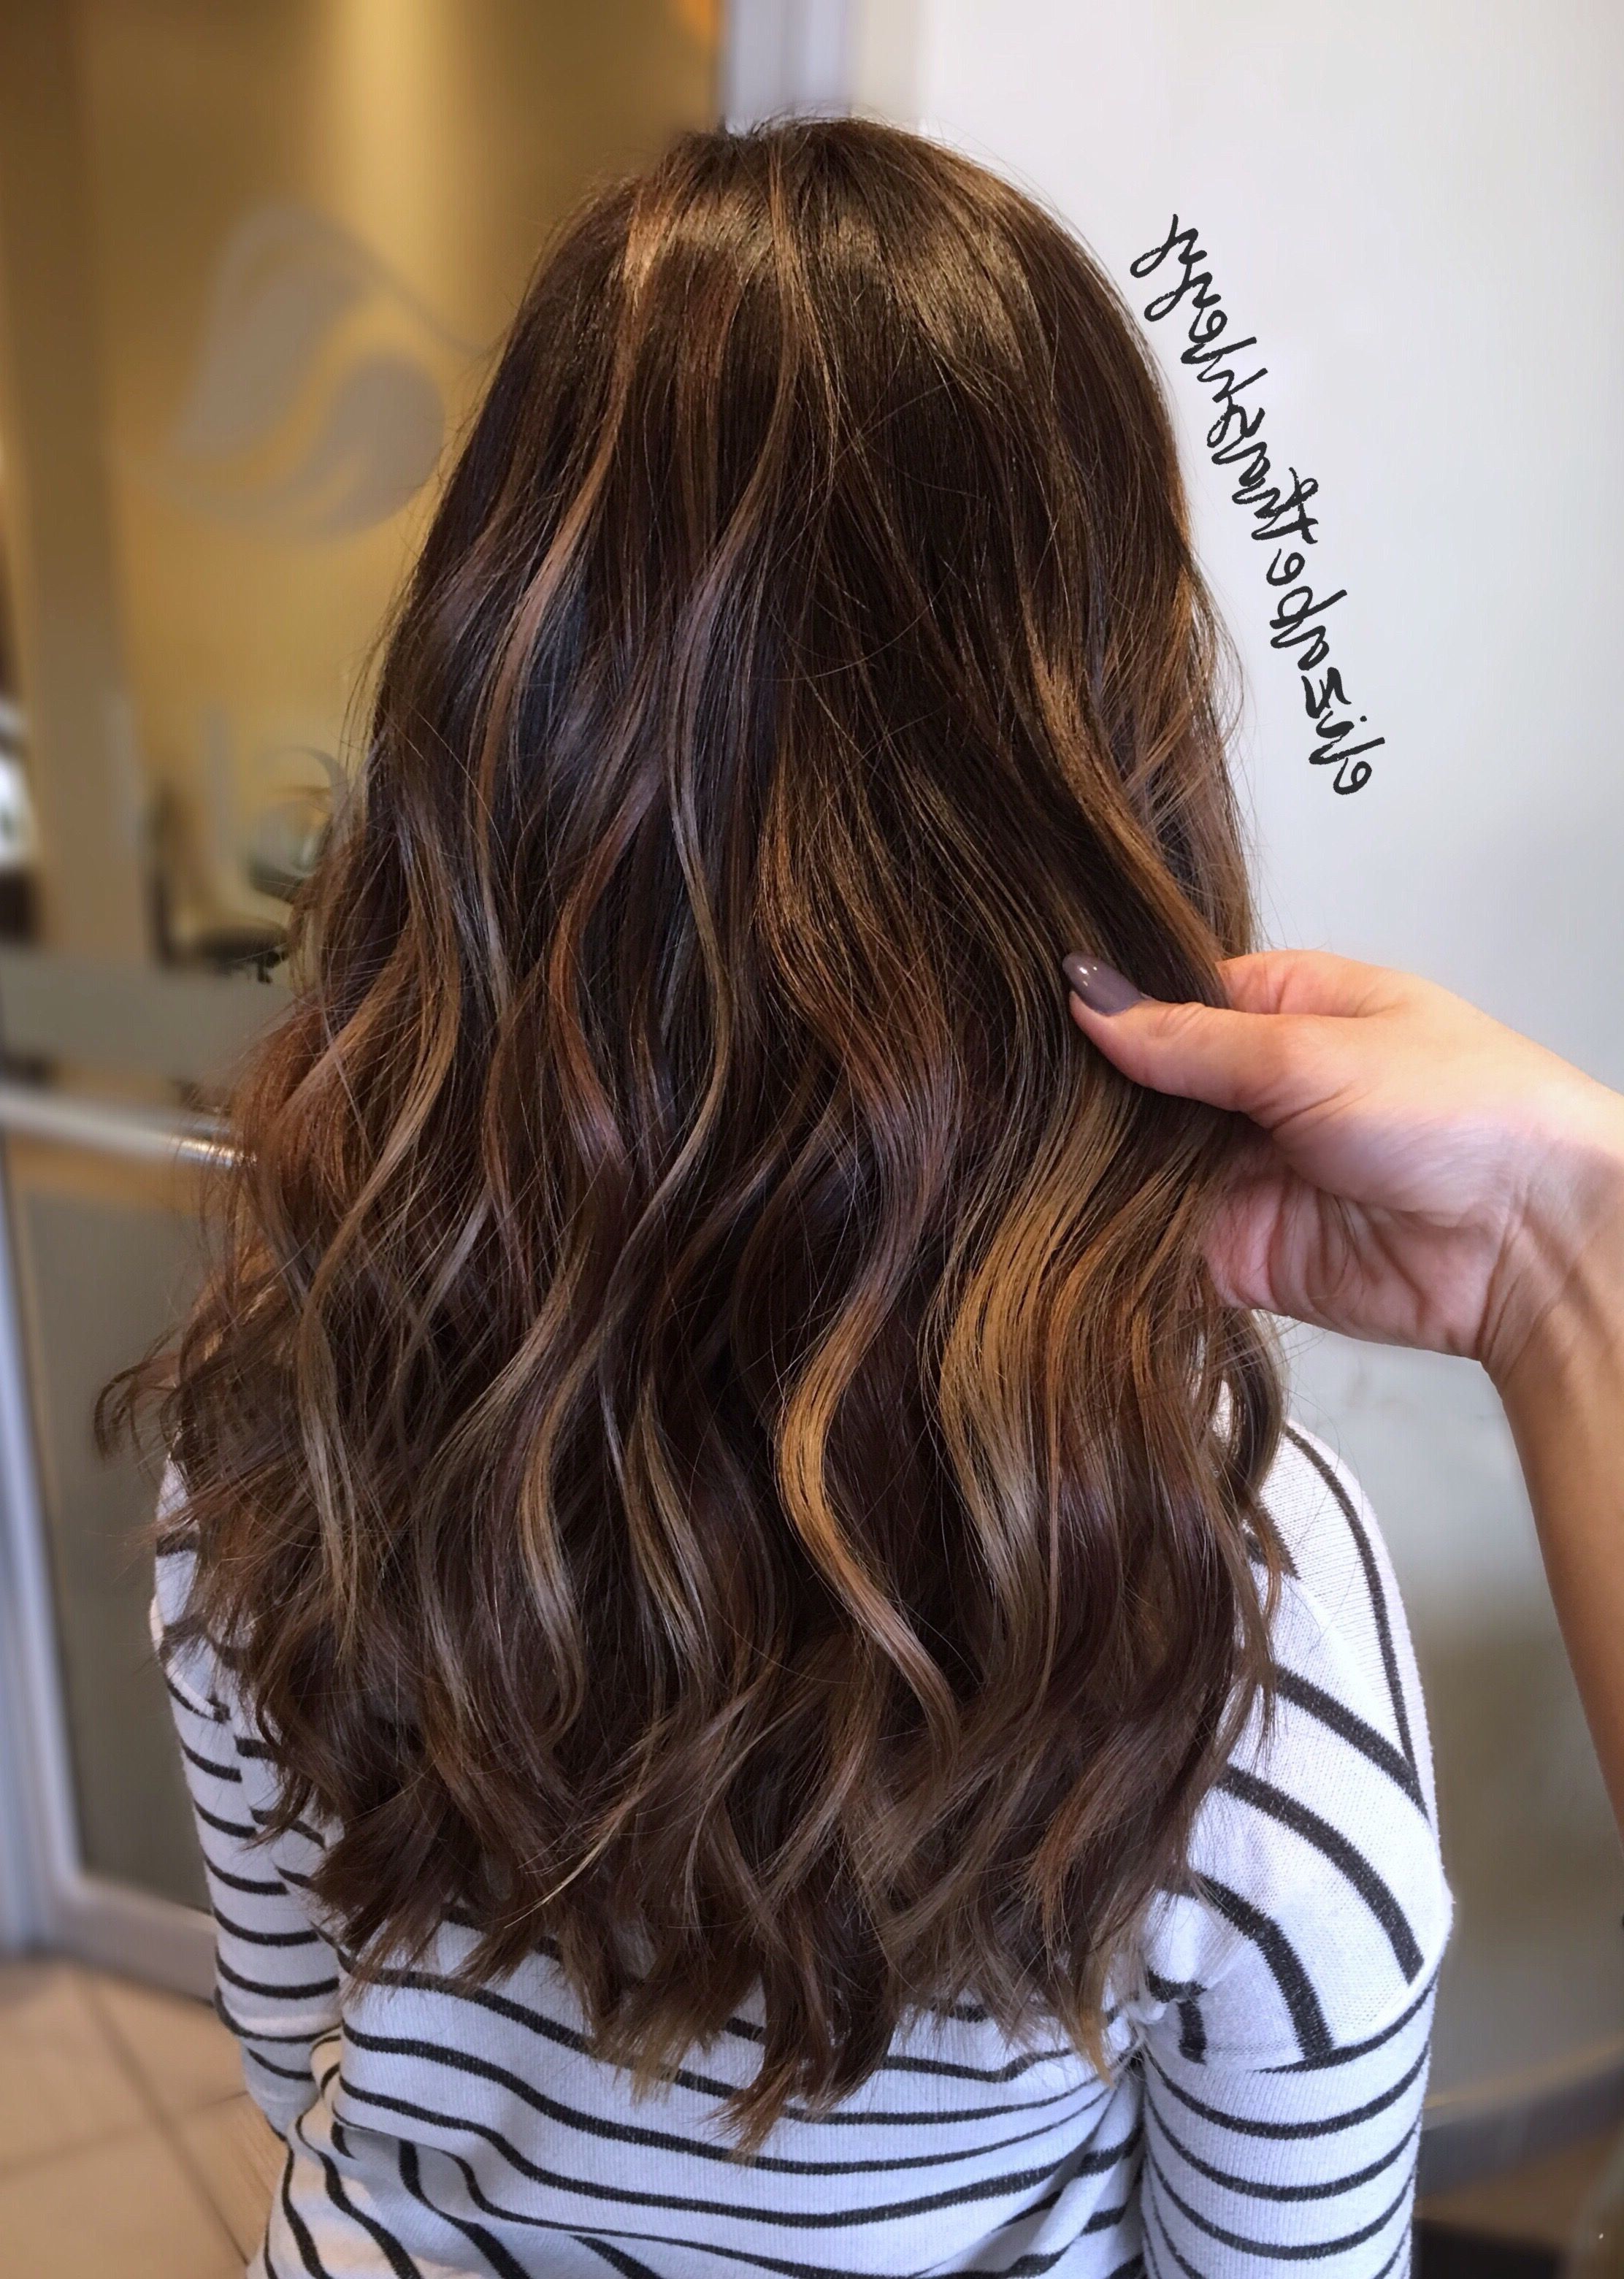 Classic Balayage On Asian Hair (View 1 of 20)